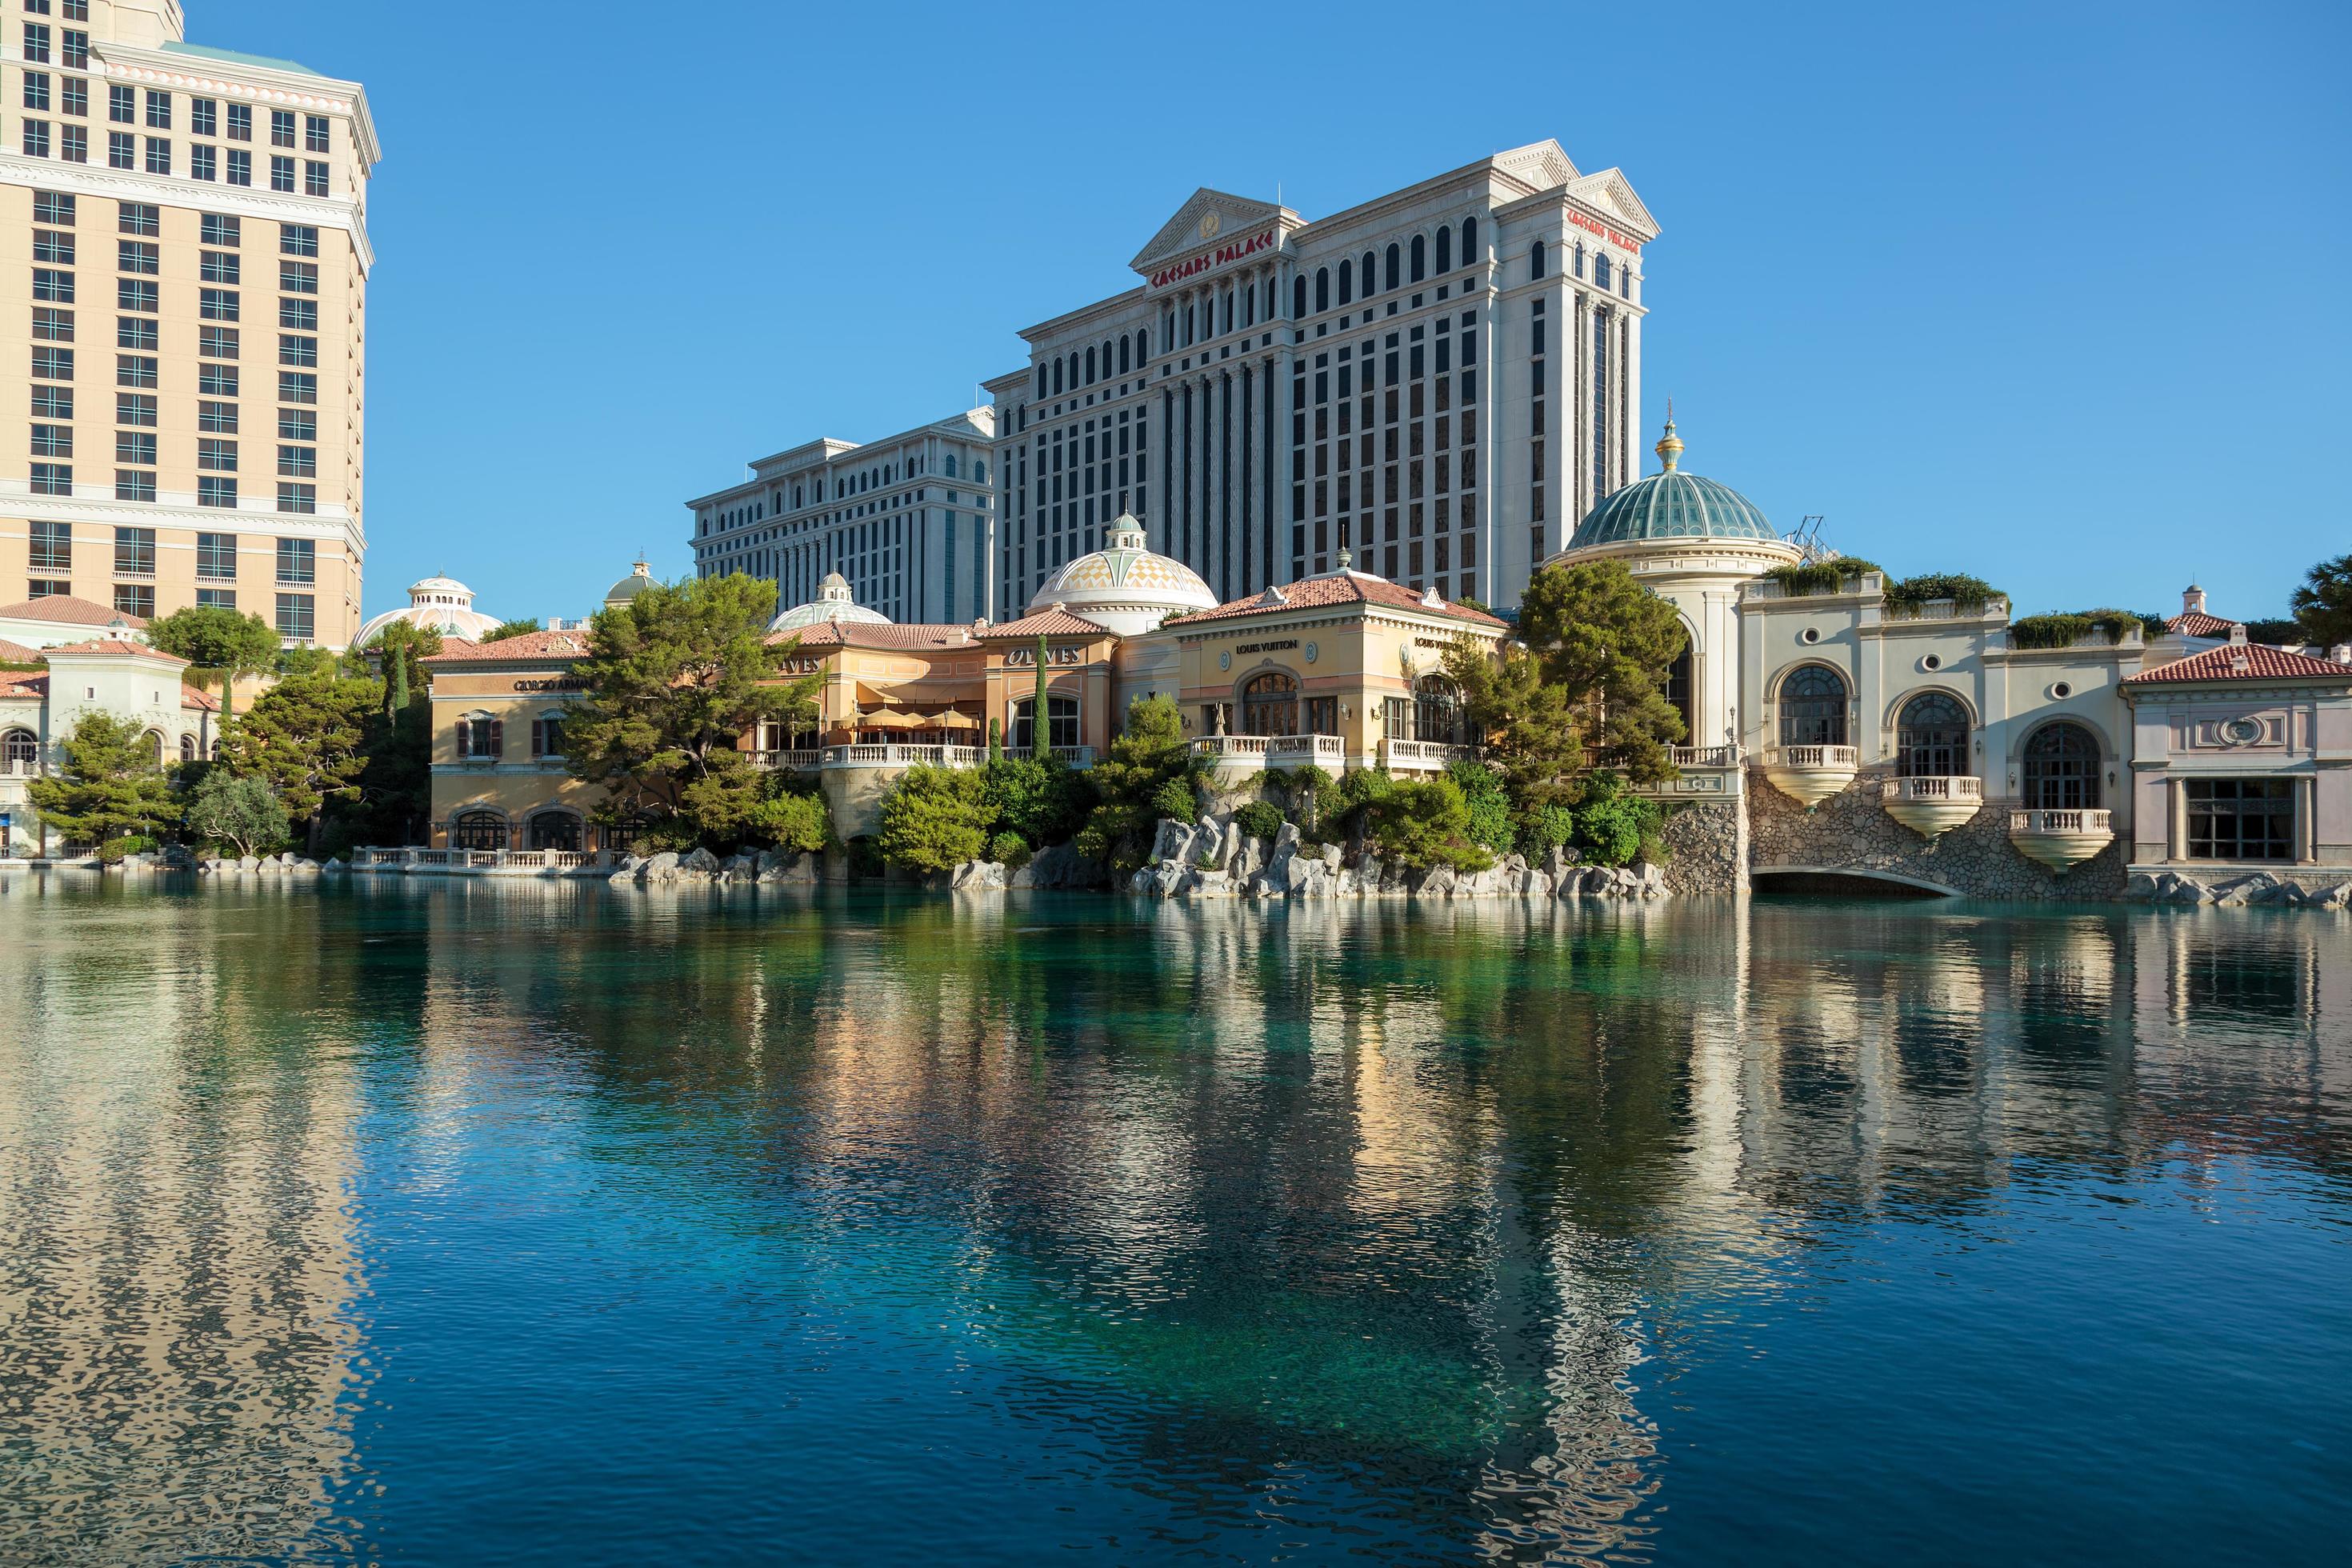 LAS VEGAS, NEVADA, USA, 2011. View of the Bellagio Hotel and